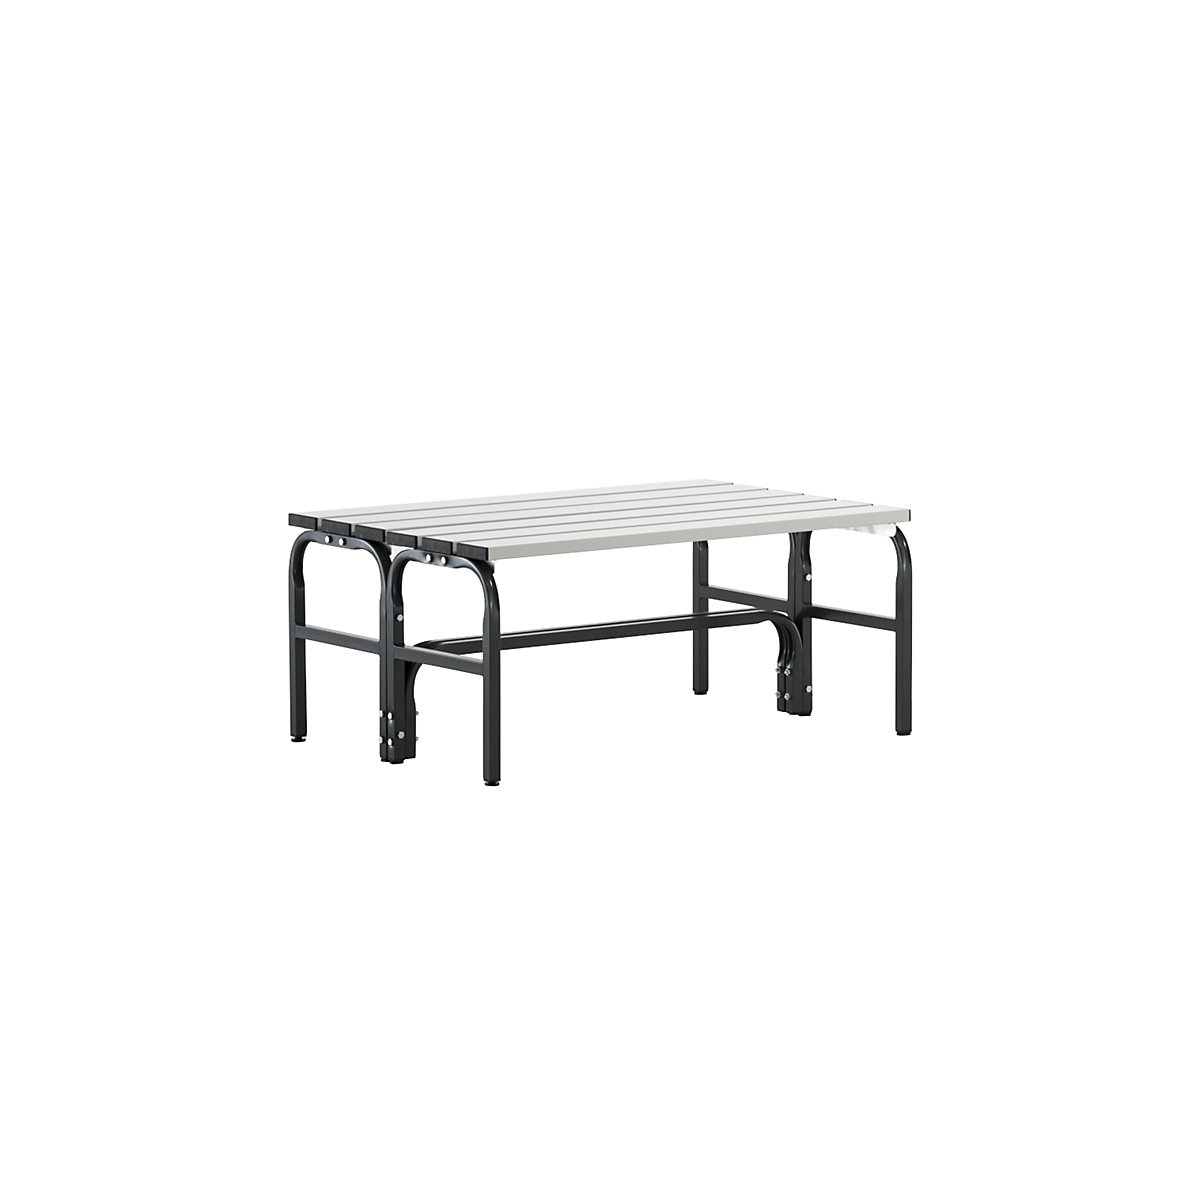 Cloakroom bench, double sided – Sypro